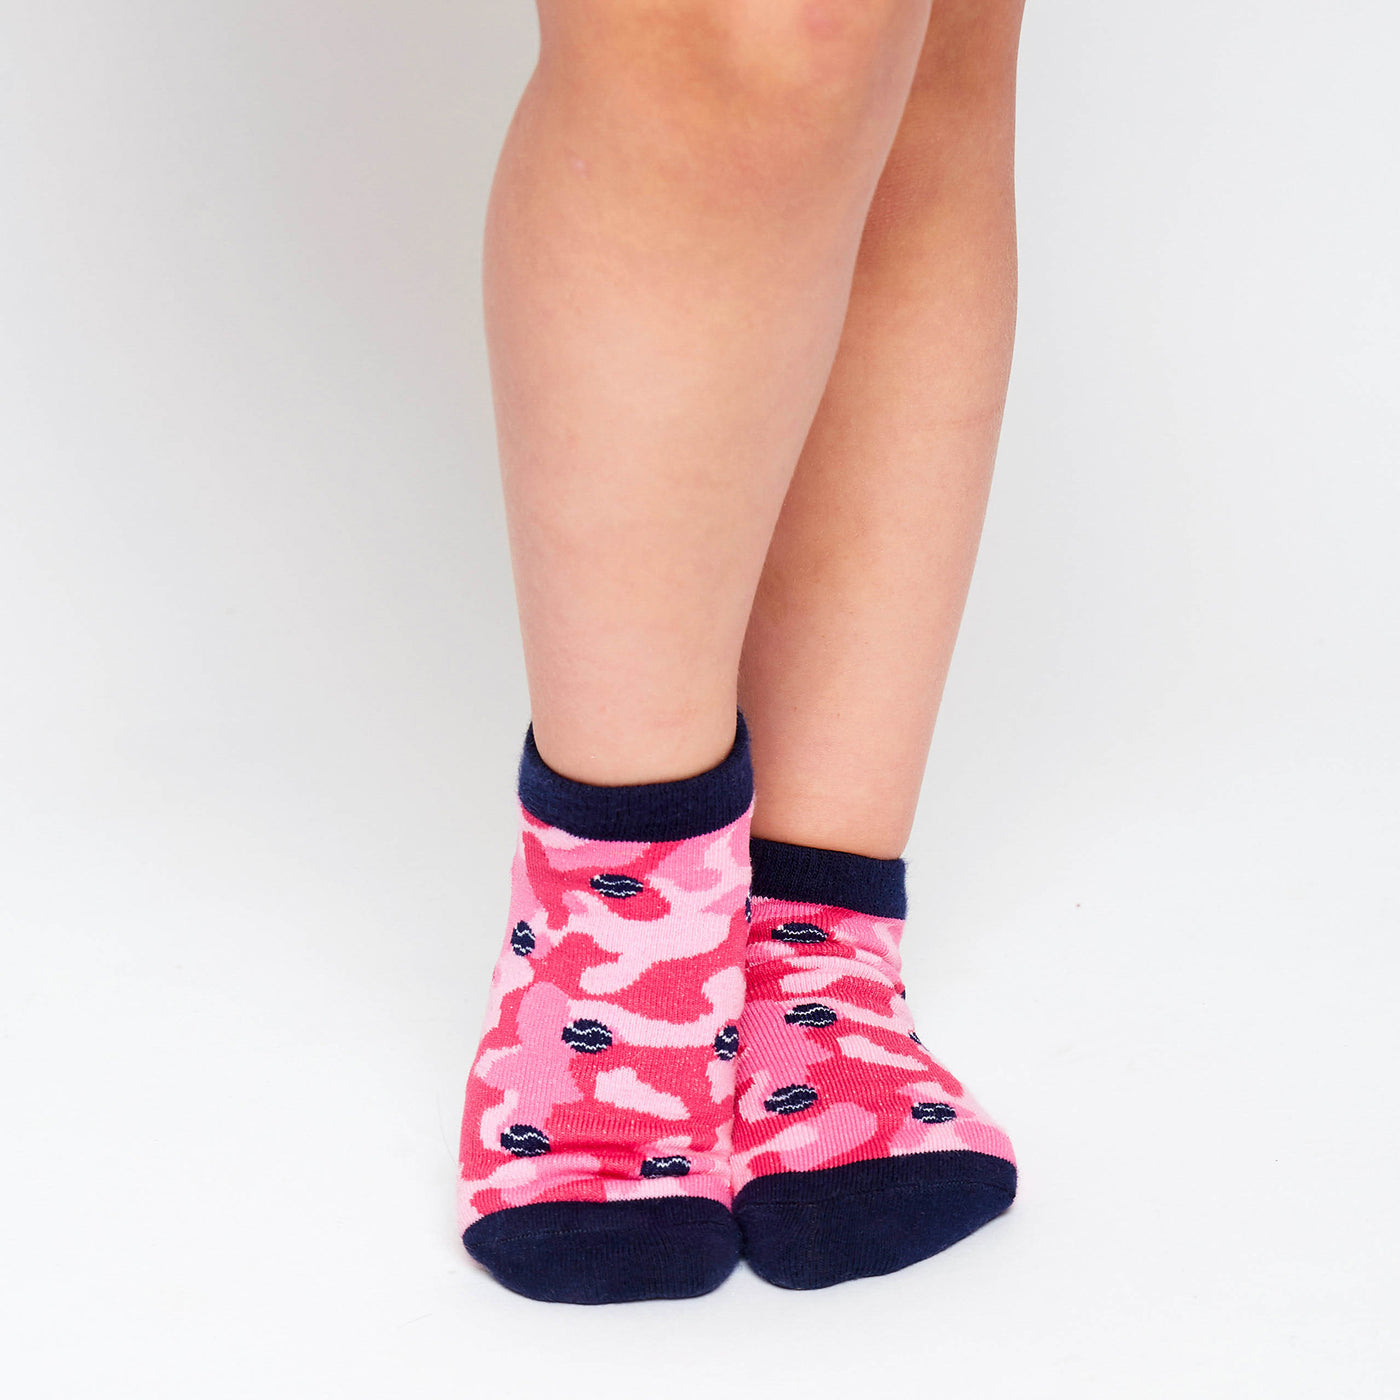 girl wearing pair of hot pink camo kids socks with navy heel and toes, and navy tennis balls stitched on socks